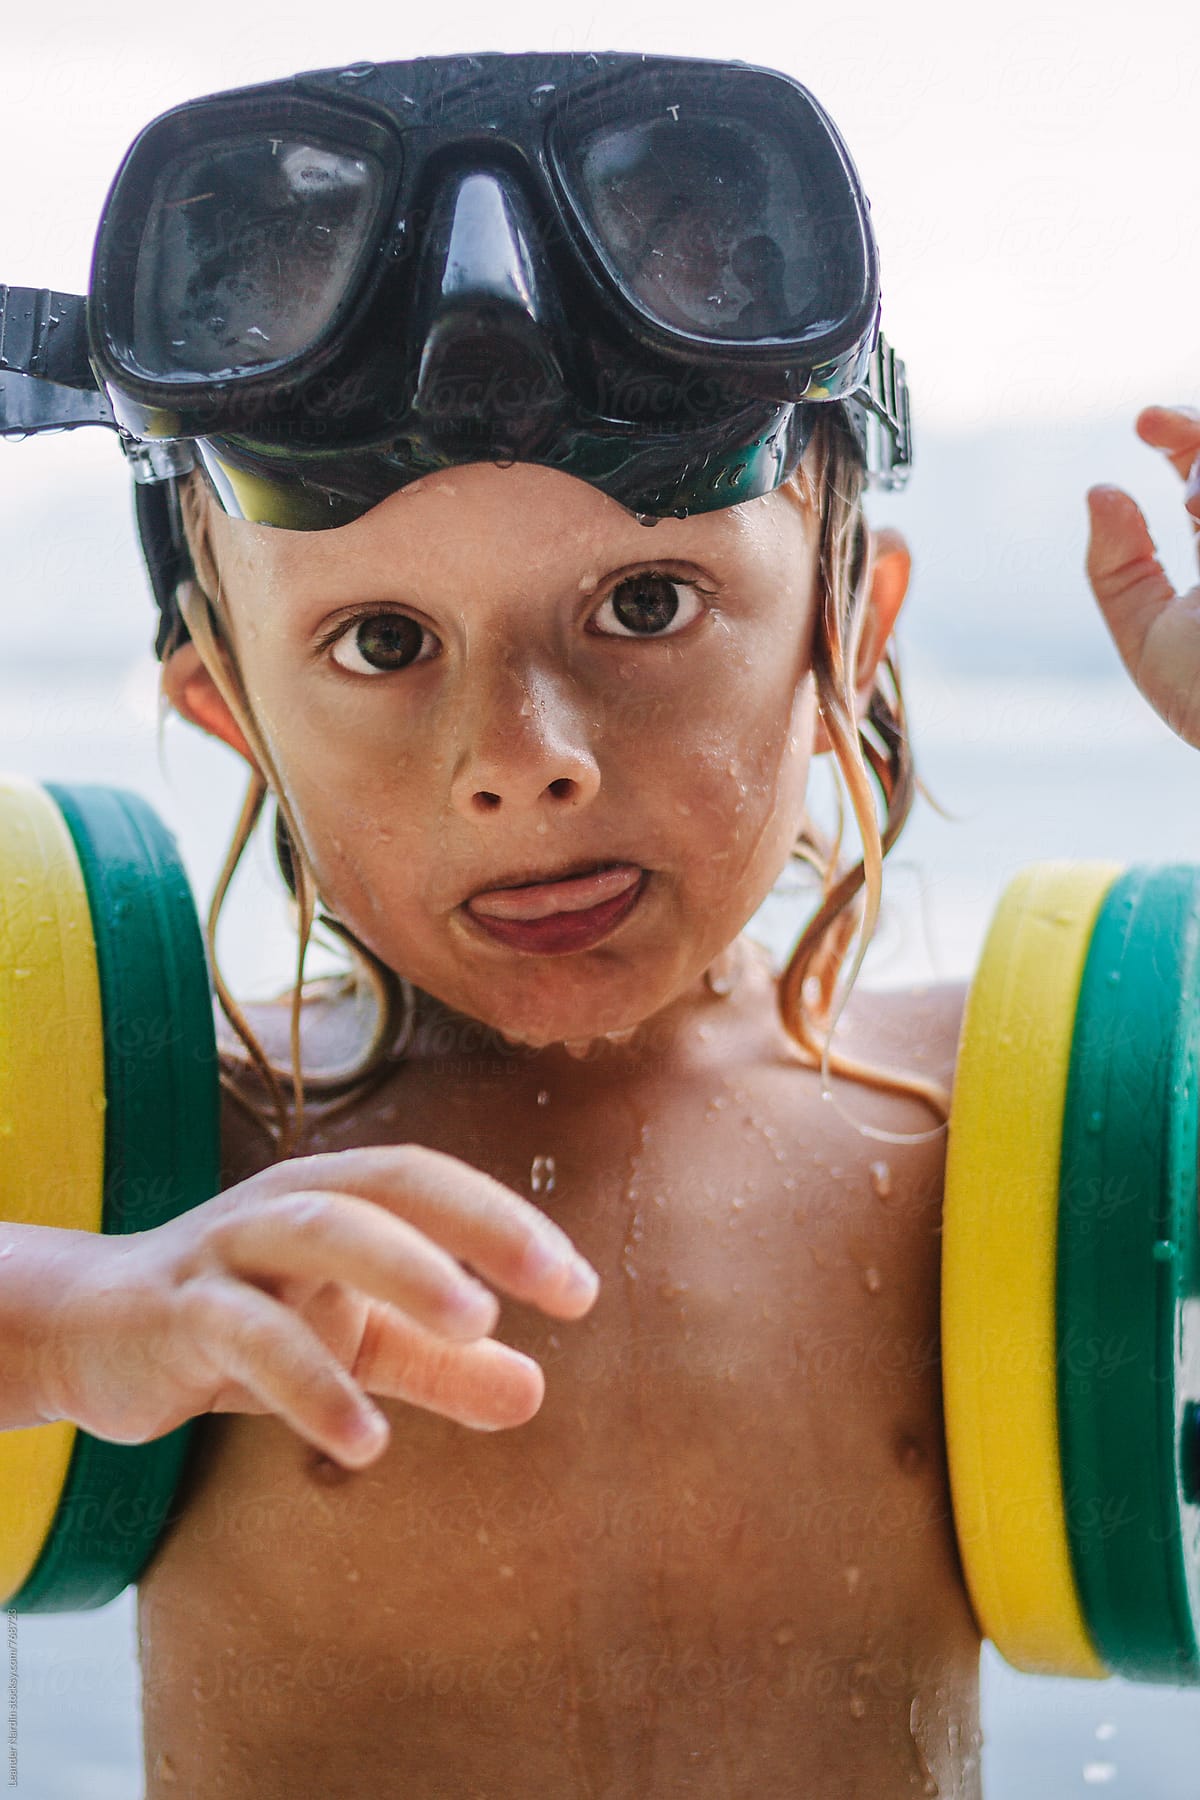 wet toddler with diving goggles on the head and swimming rings